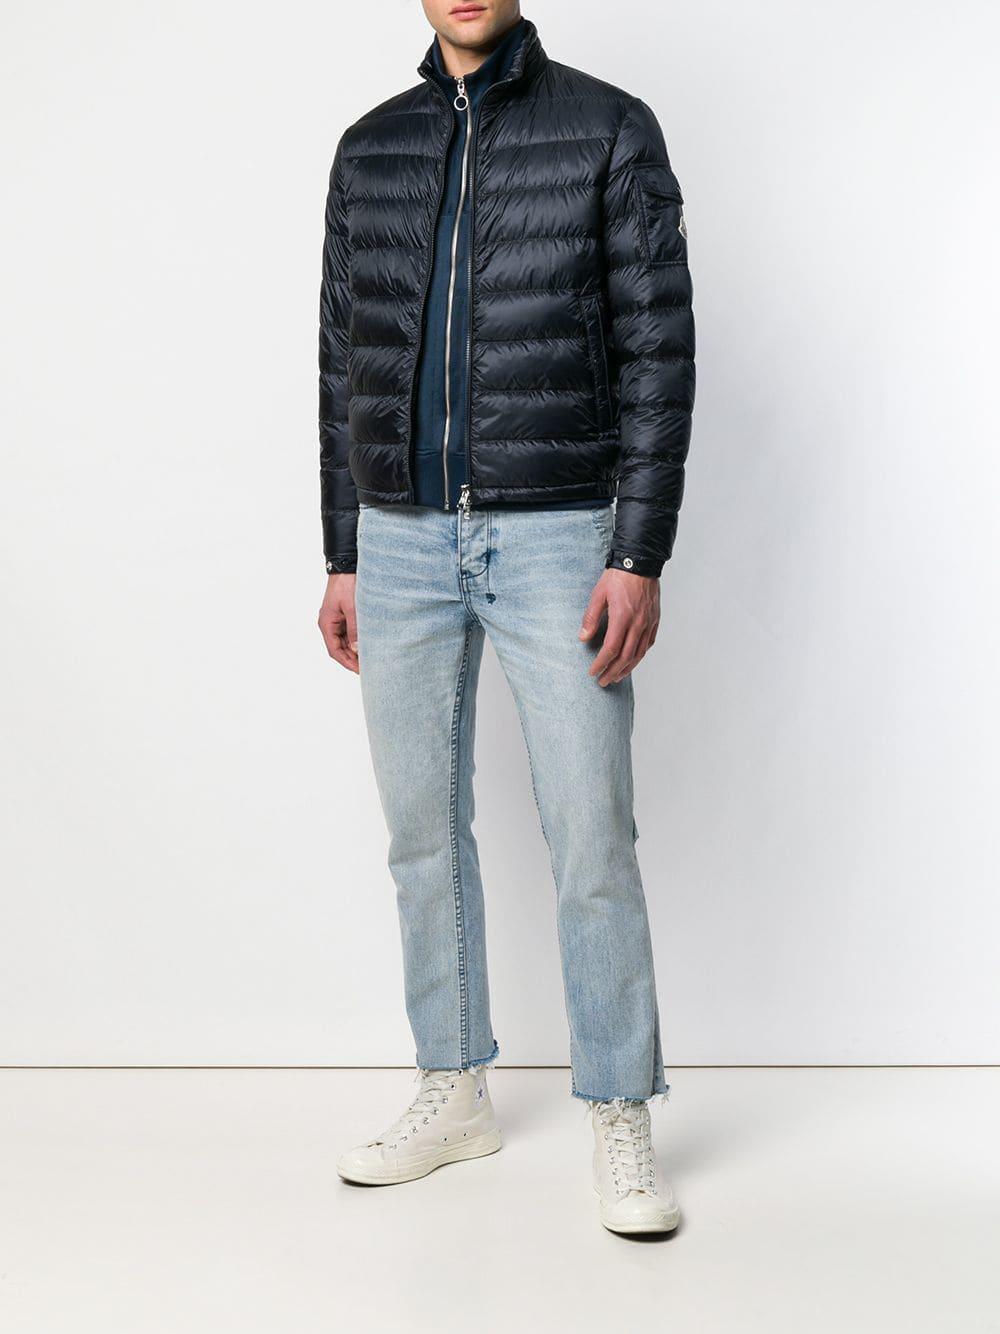 Moncler Lambot Quilted Jacket in Blue for Men - Lyst